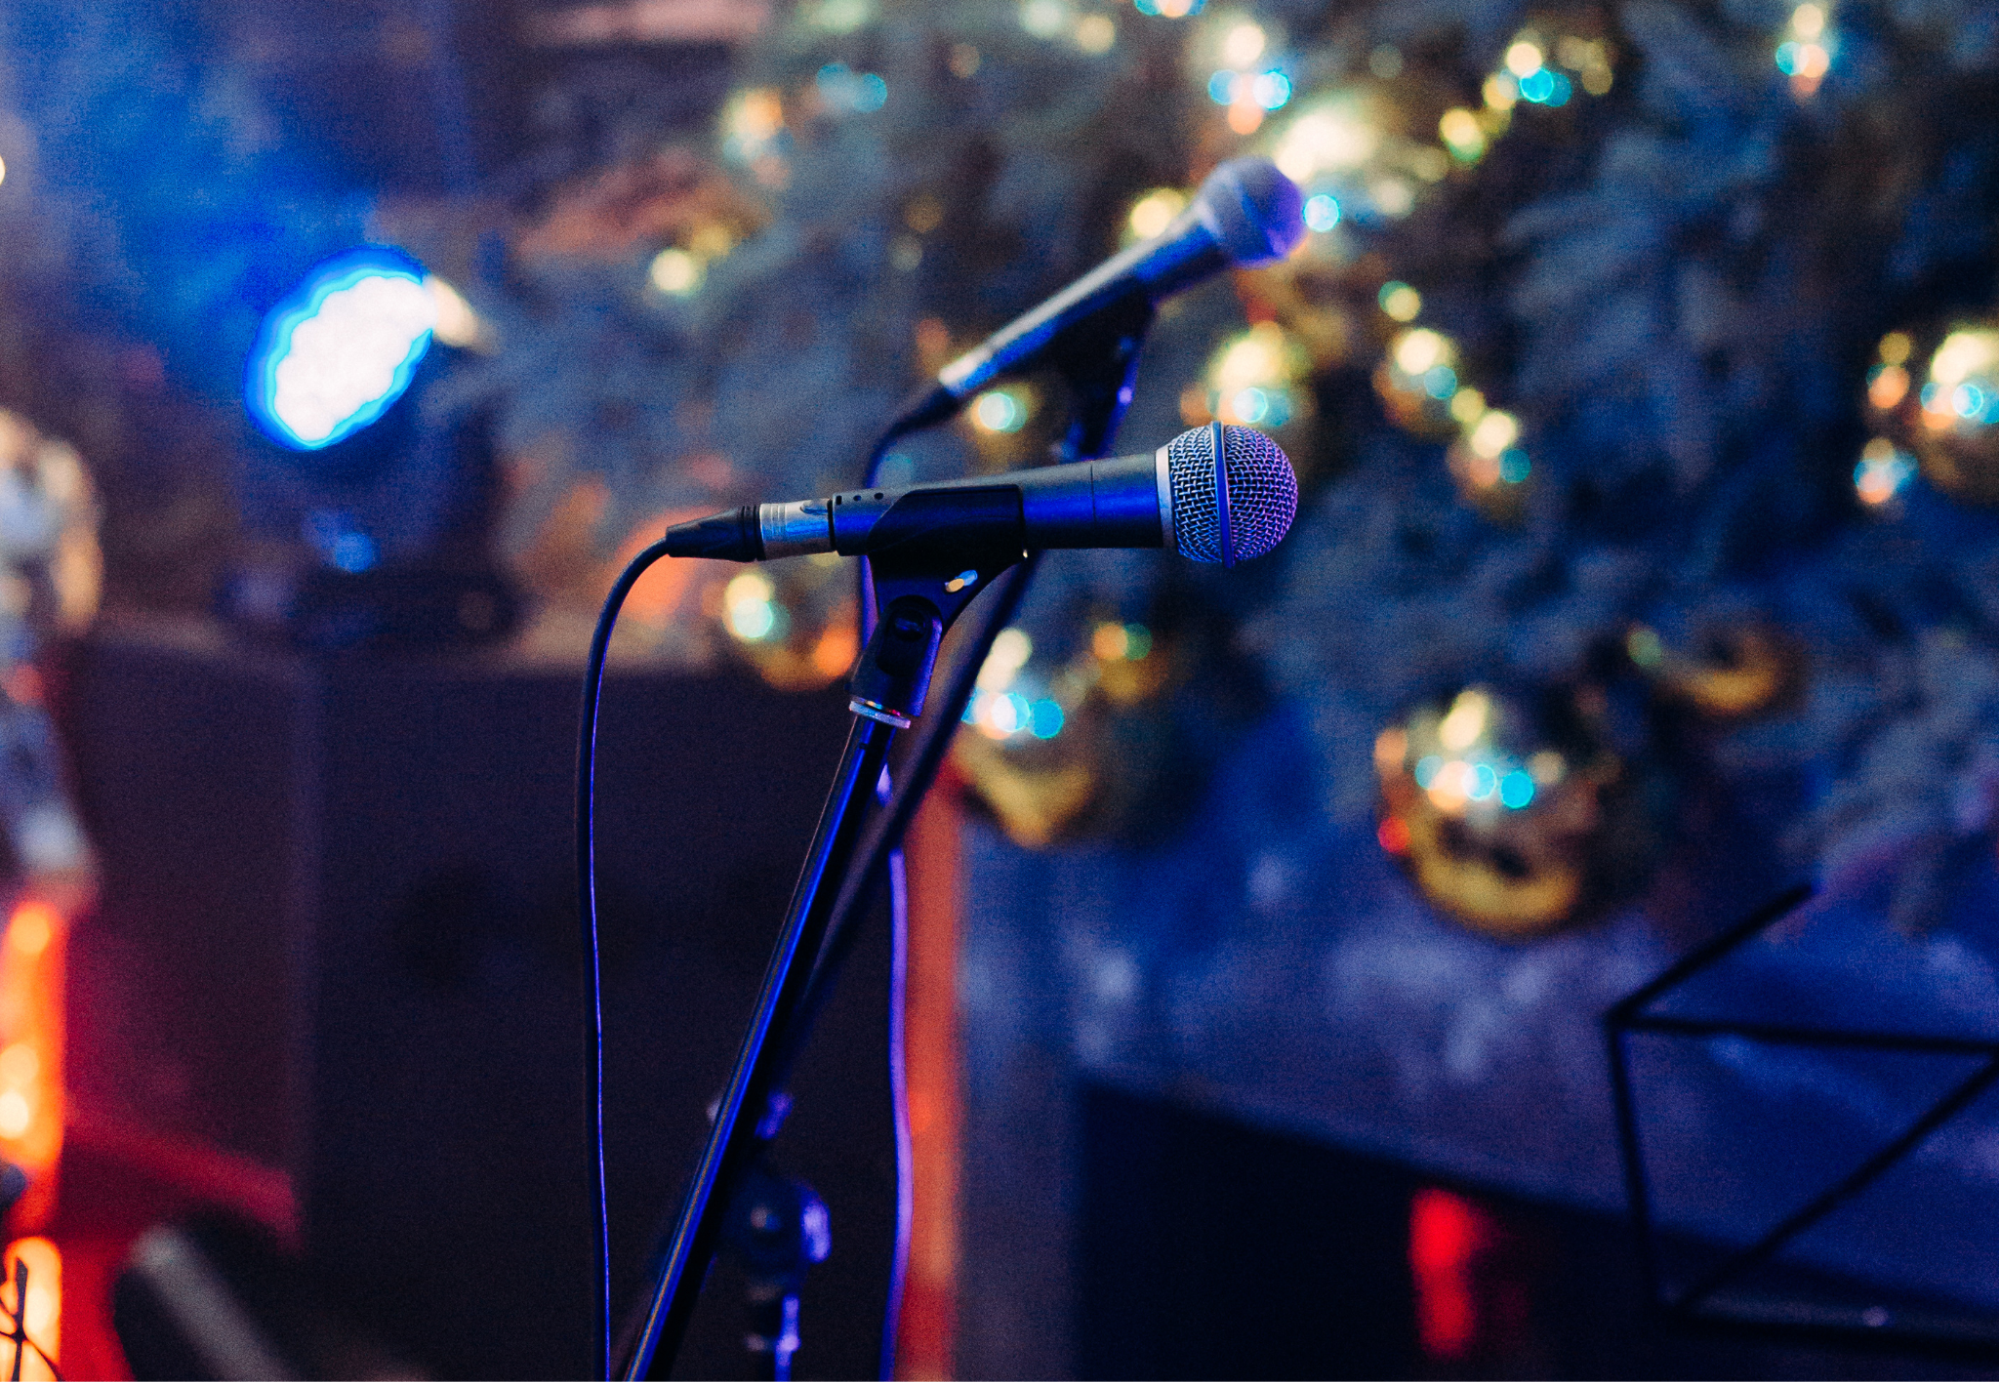 Two microphones on the stage in front of the Christmas tree.